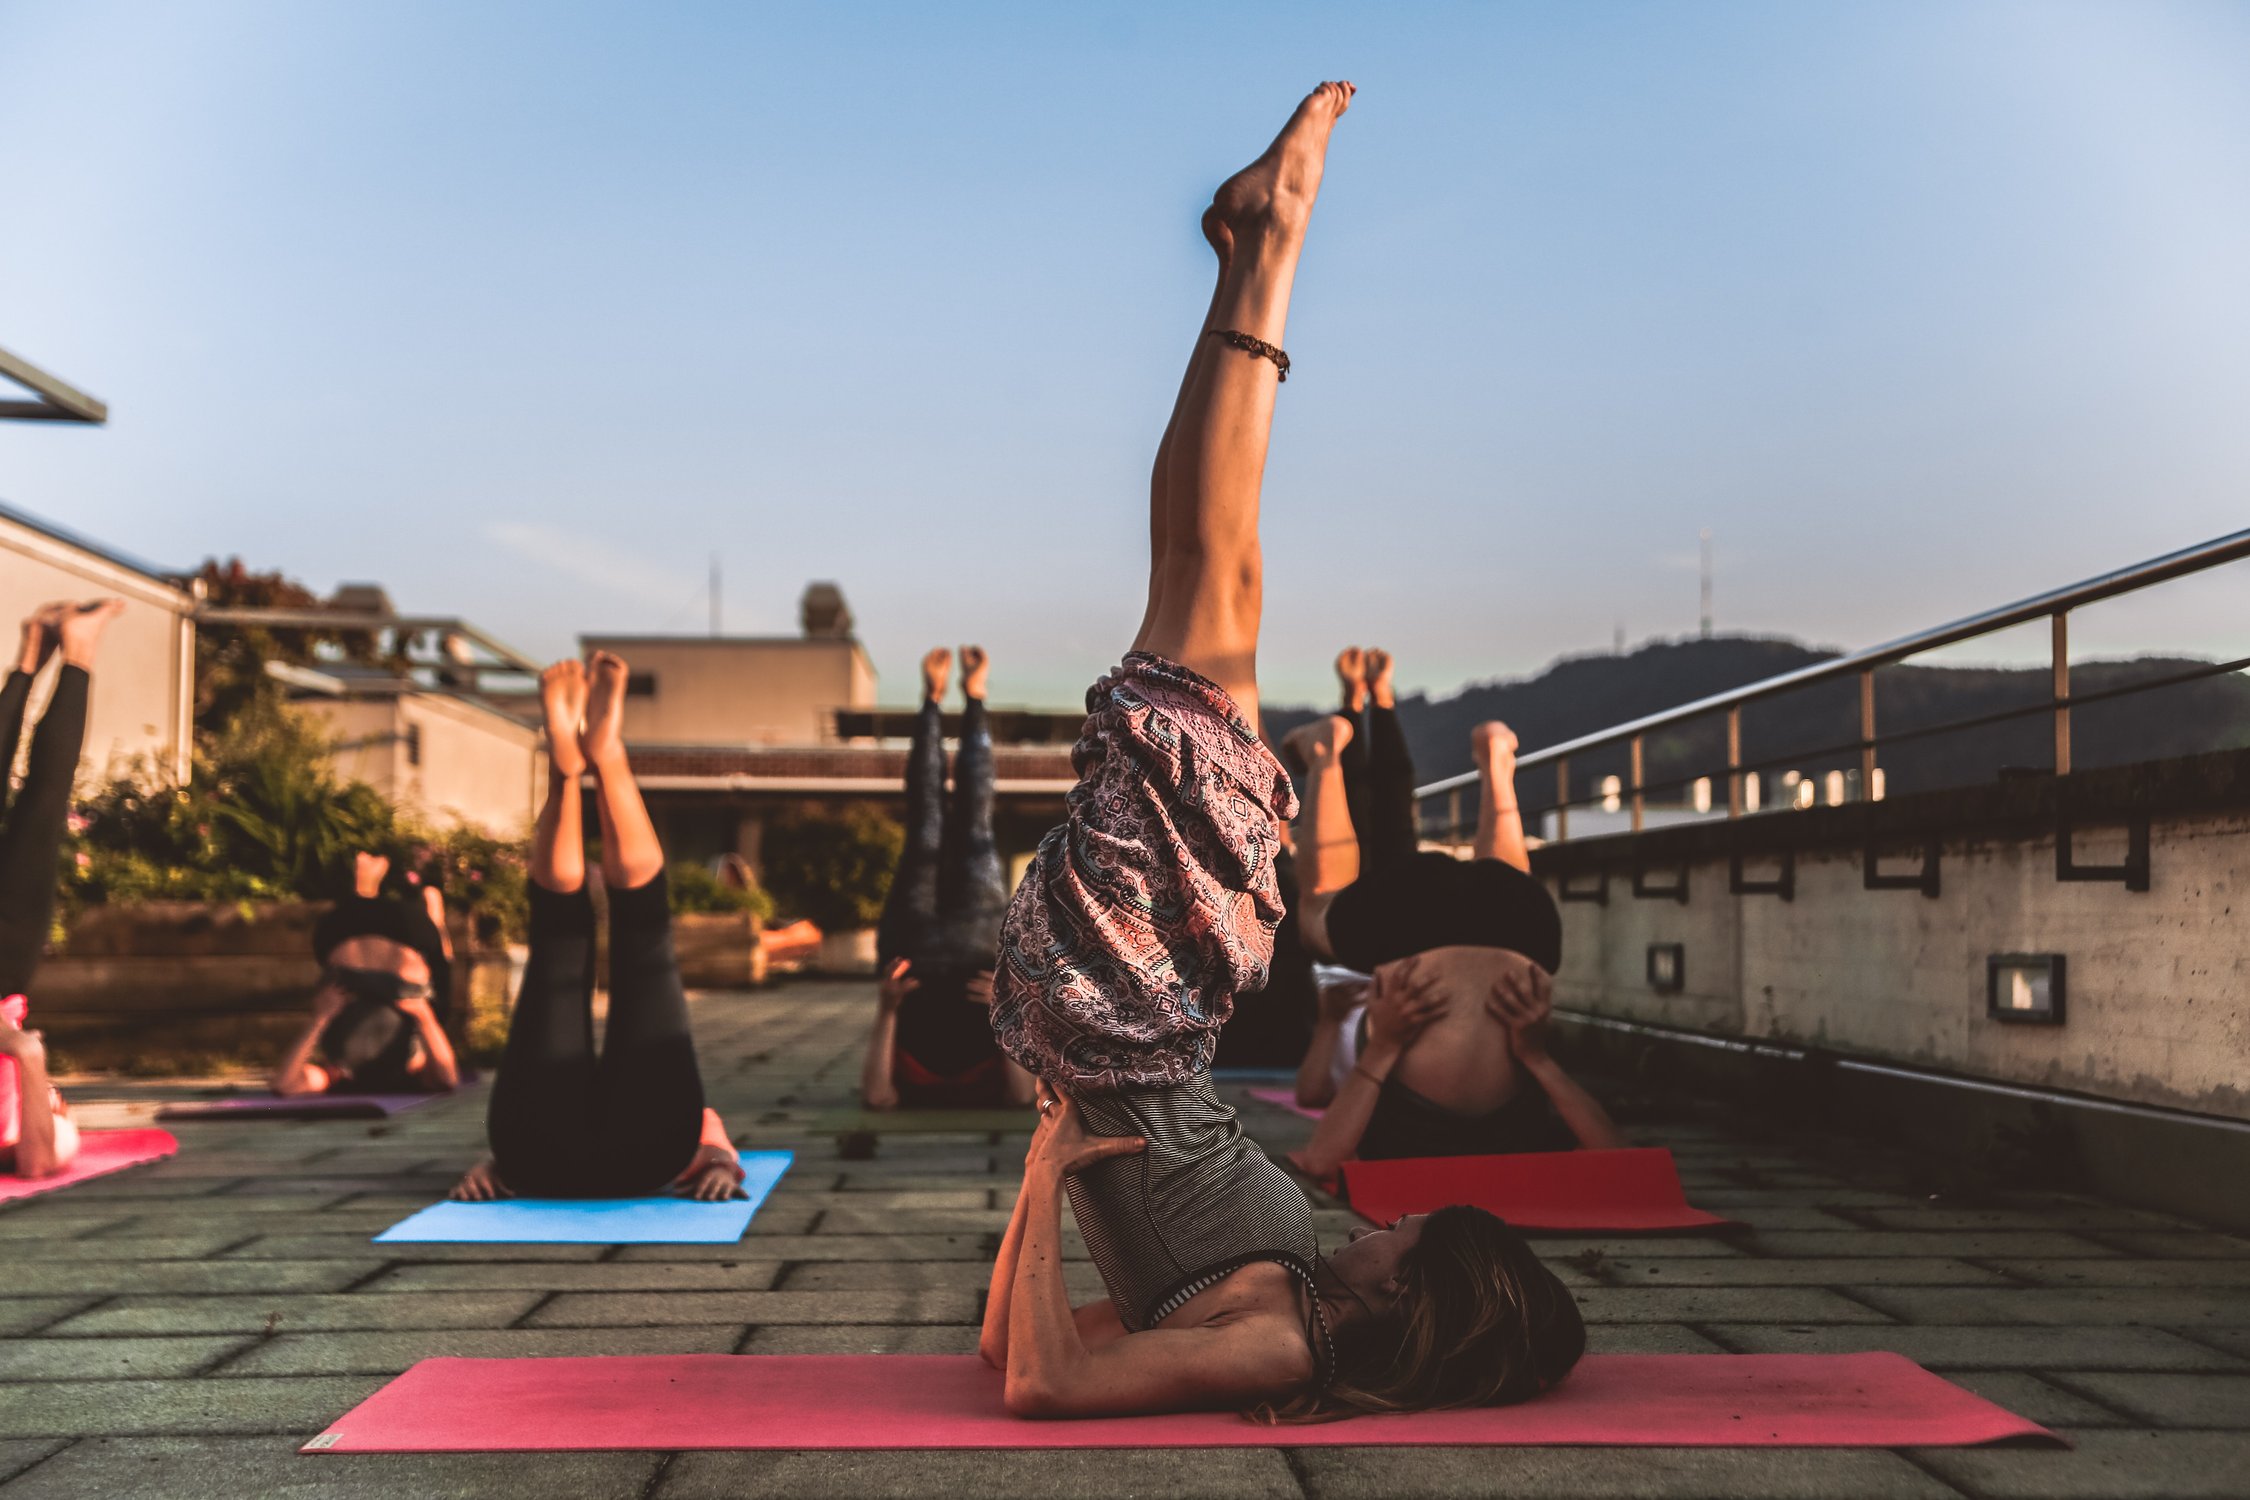 How to Build a Sustainable Yoga Career?